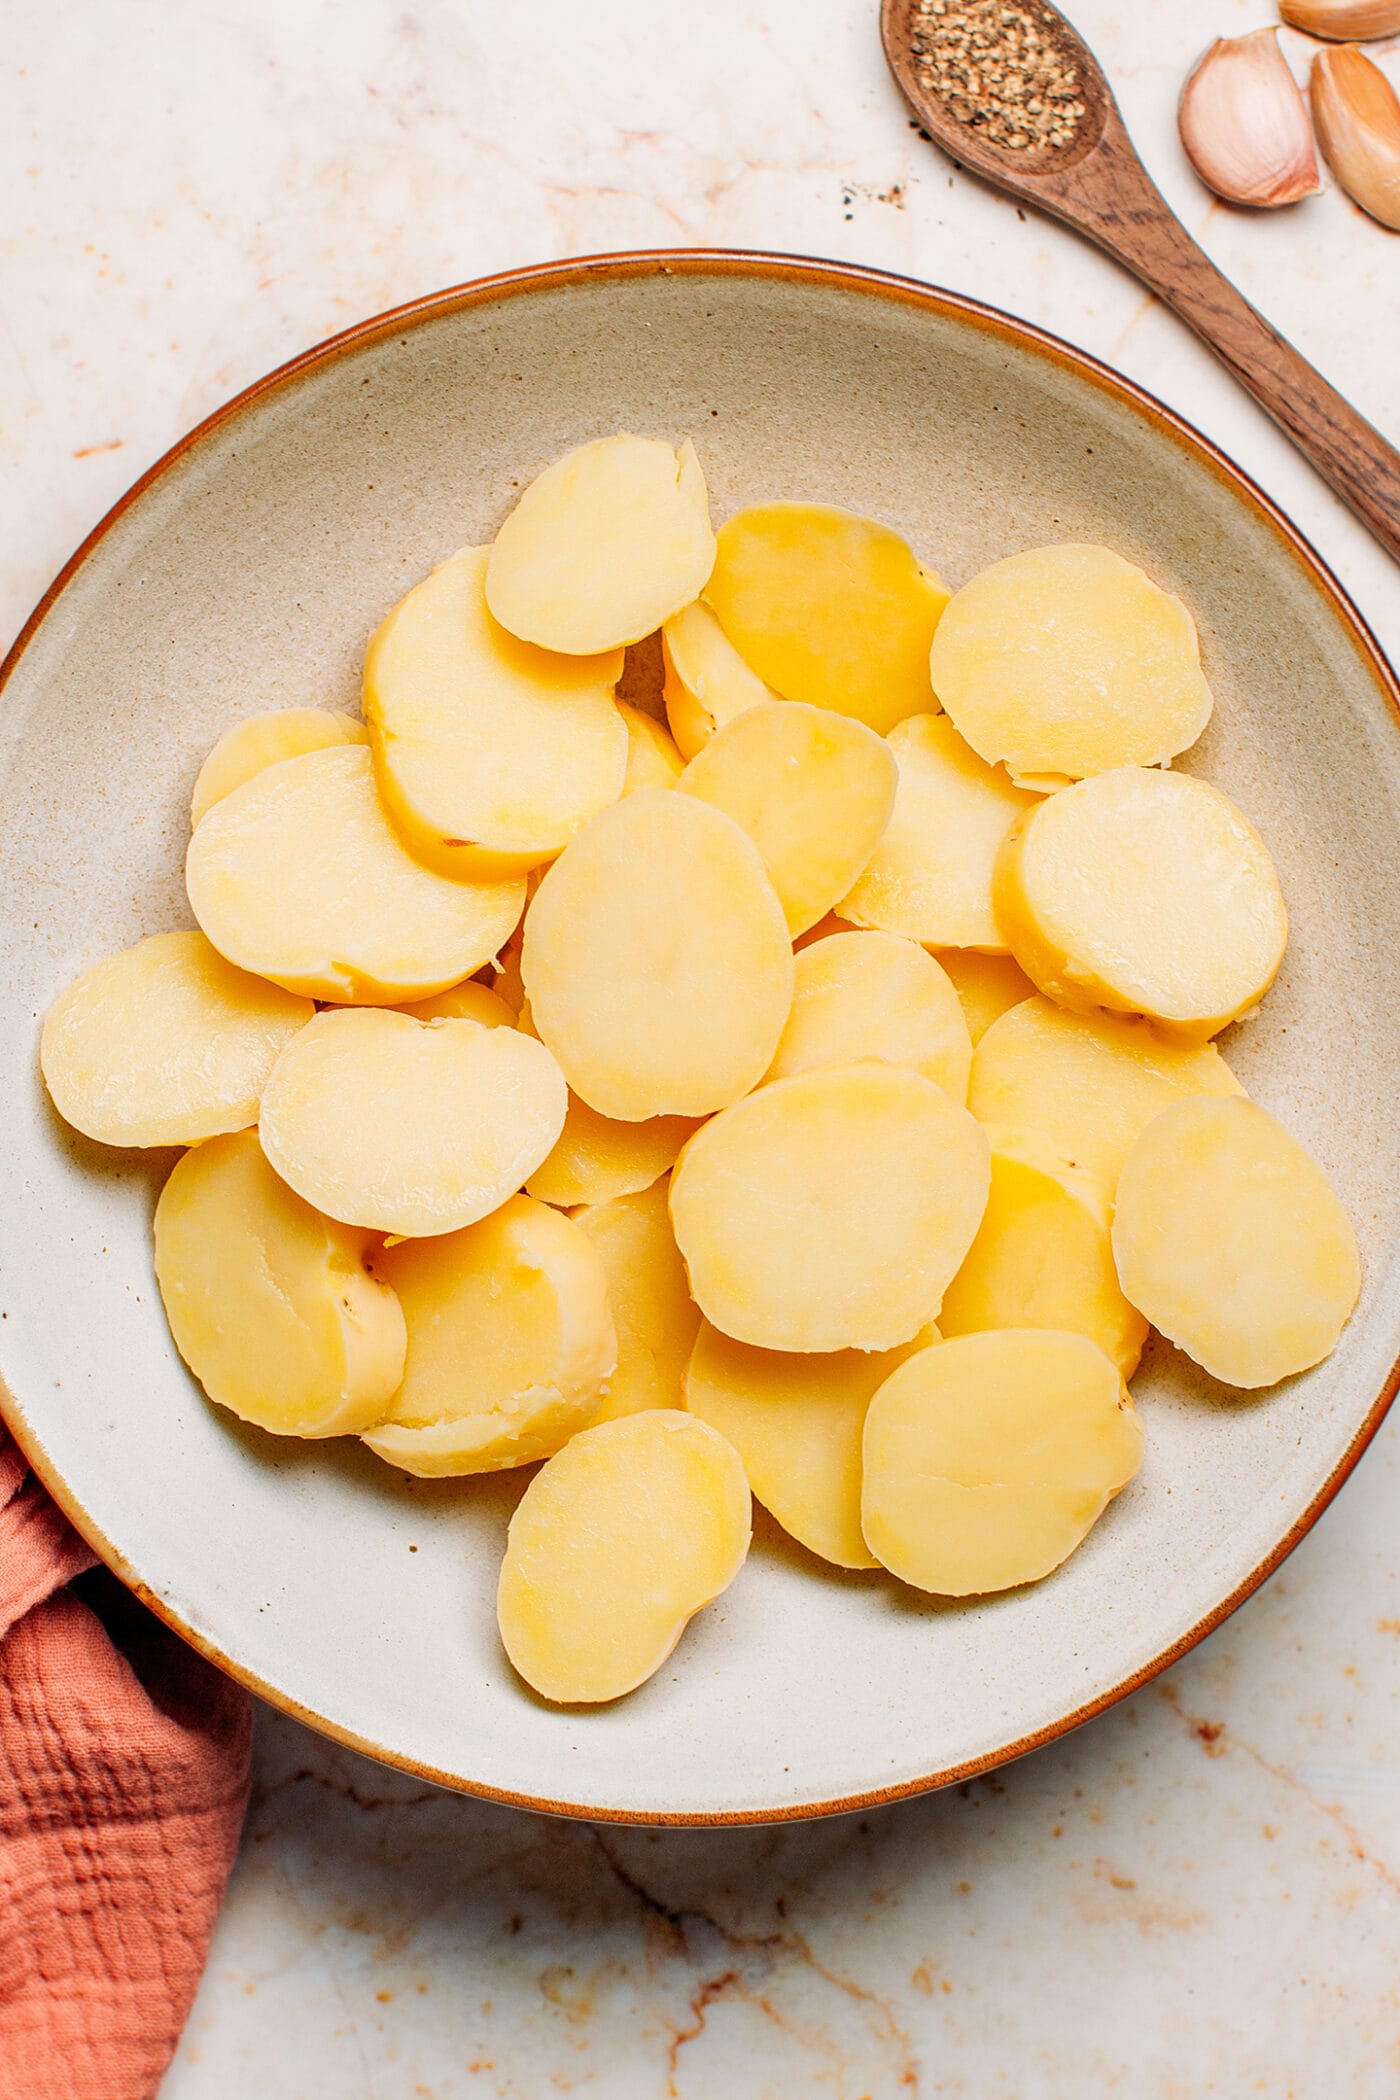 Cooked and sliced baby potatoes.